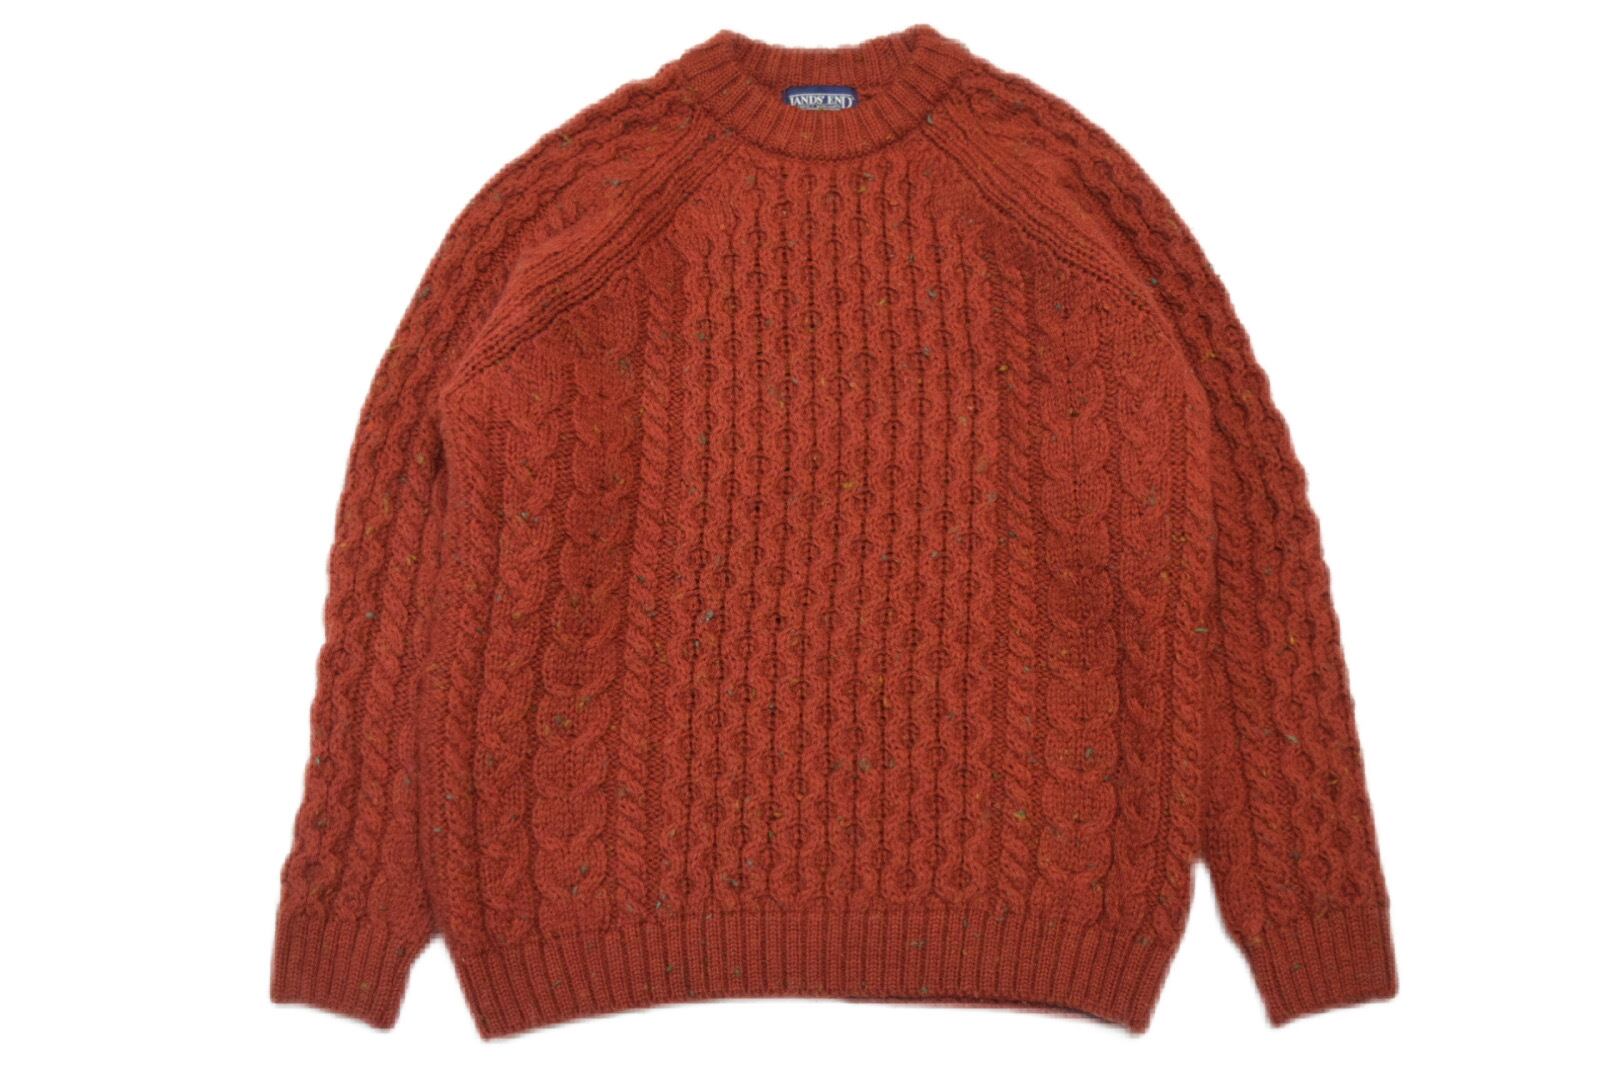 USED 80s LANDS' END Wool sweater -Small 01809